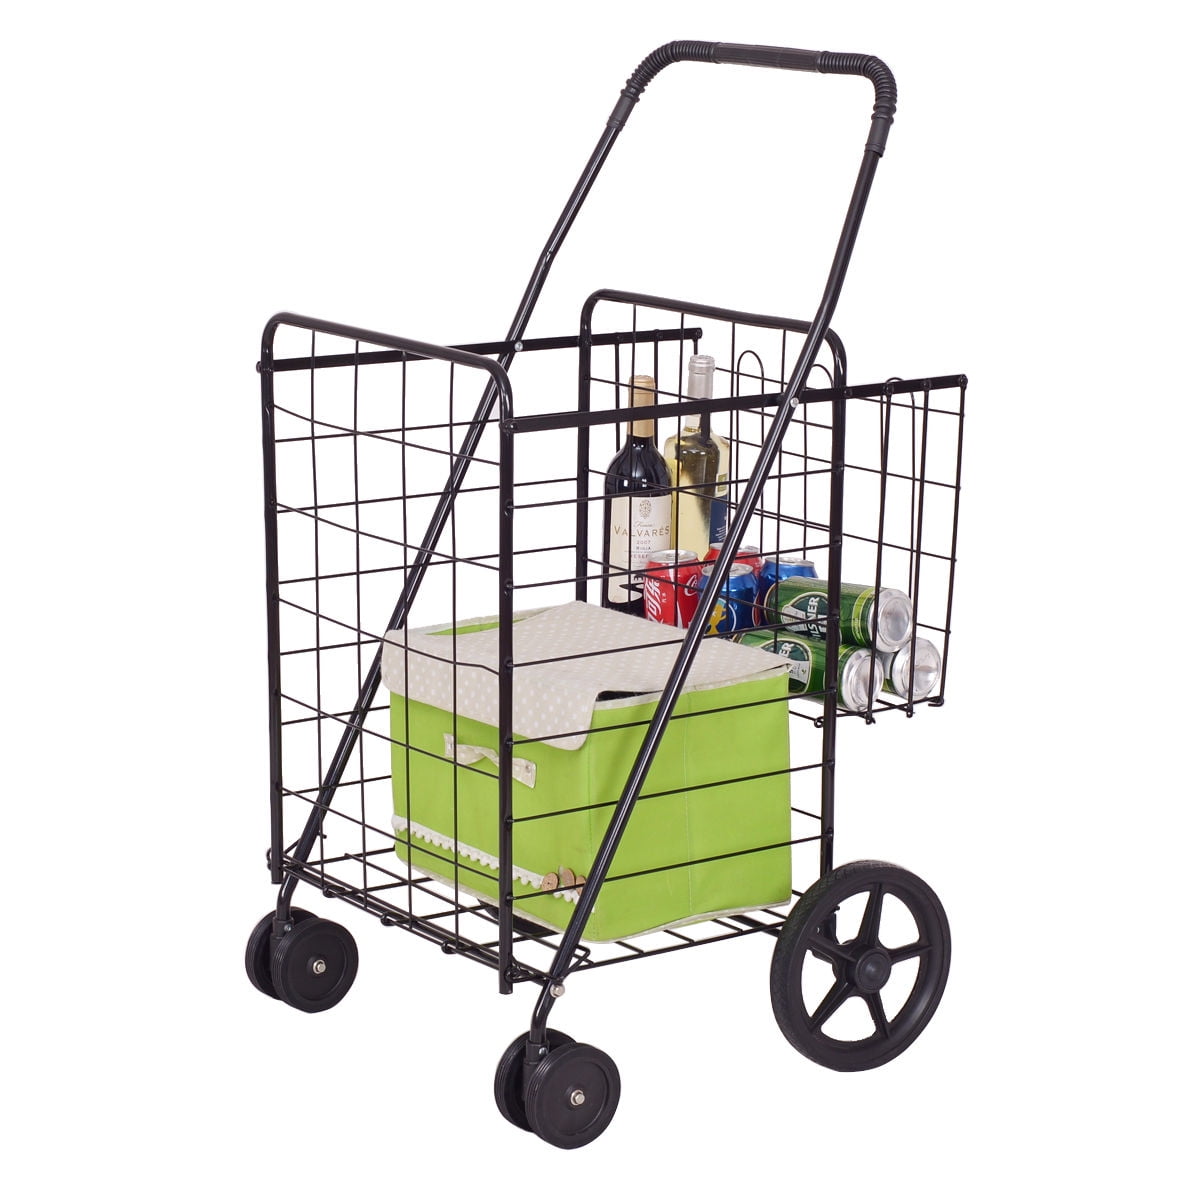 KFDQ Old Person Shopping Trolleys，Shopping Cart Climb Stairs Loading Cart Small Cart Elderly Supermarket Portable Folding Hand Push Luggage Pull Trolley,A 